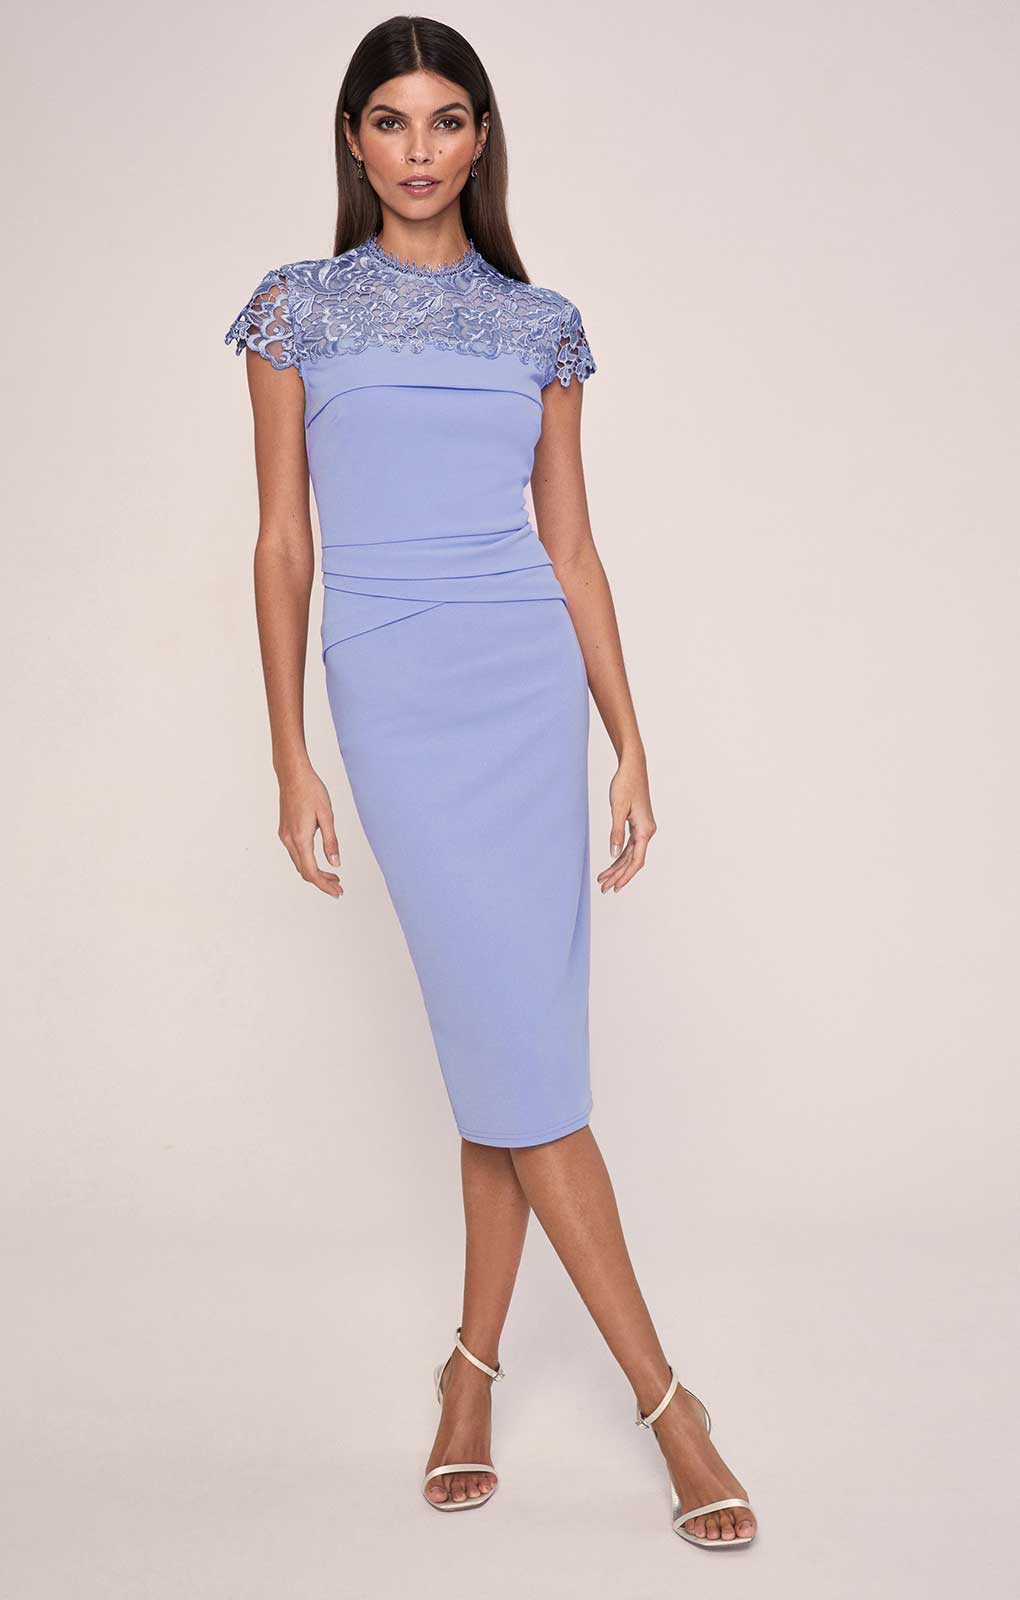 Lipsy Cornflower Blue Lace Top Bodycon Dress product image